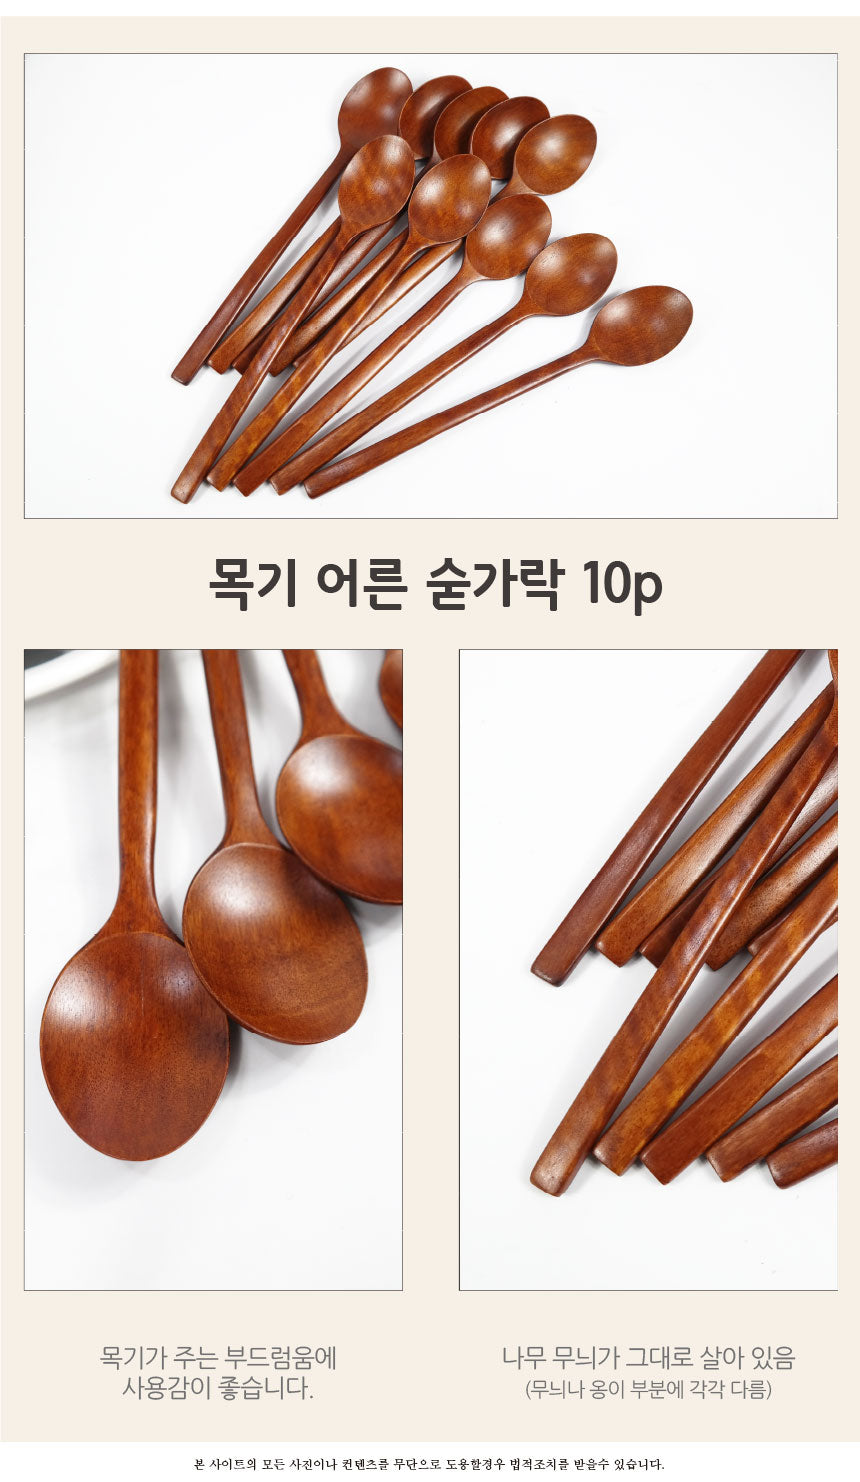 Wooden Spoon 10p Kitchenware Tableware Meal Campingware